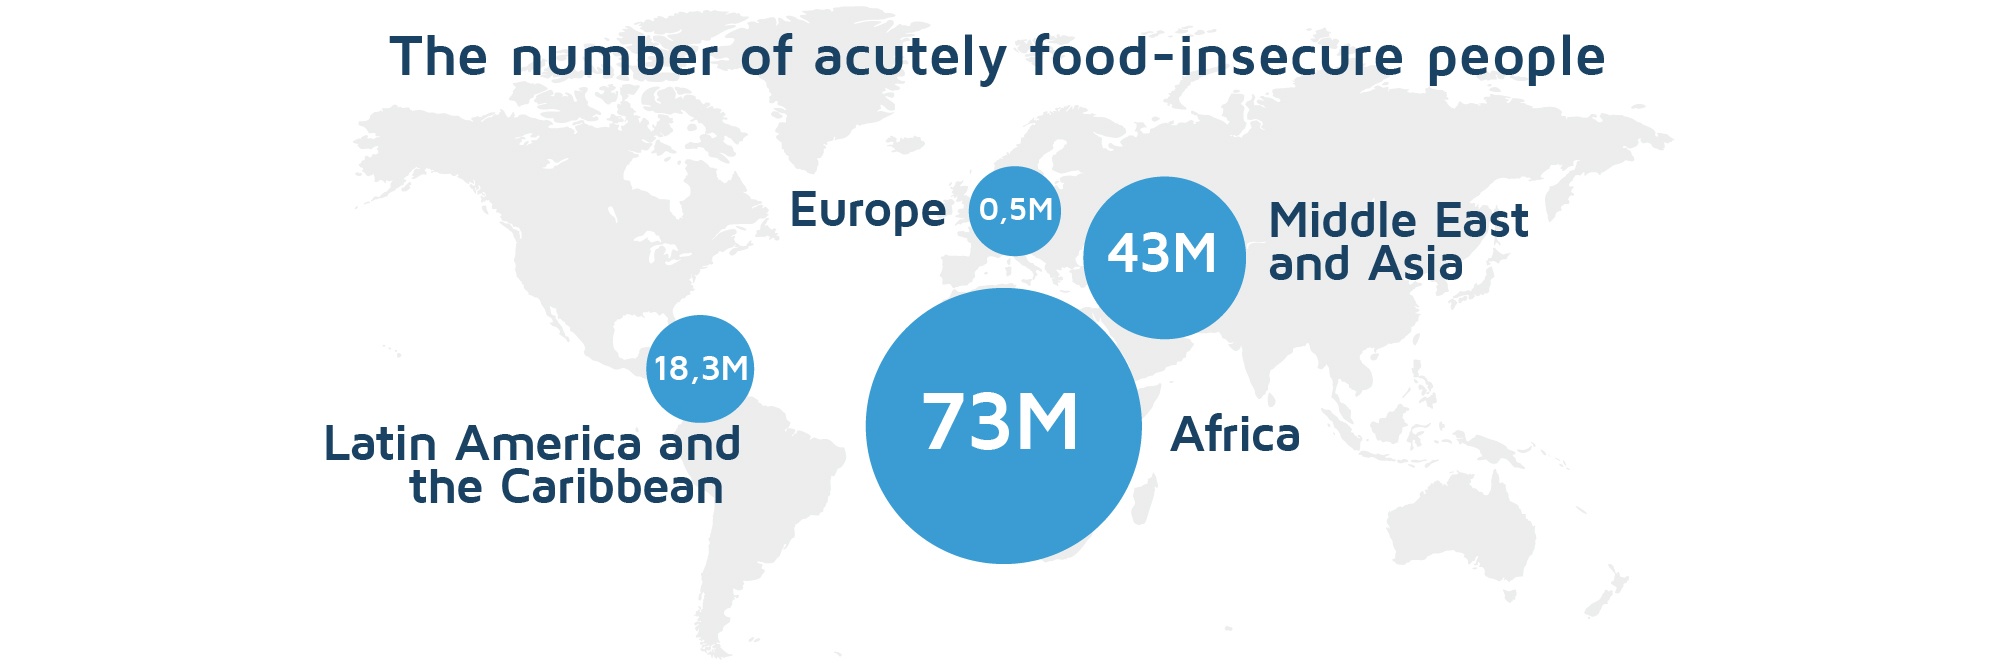 The number of acutely food-insecure people